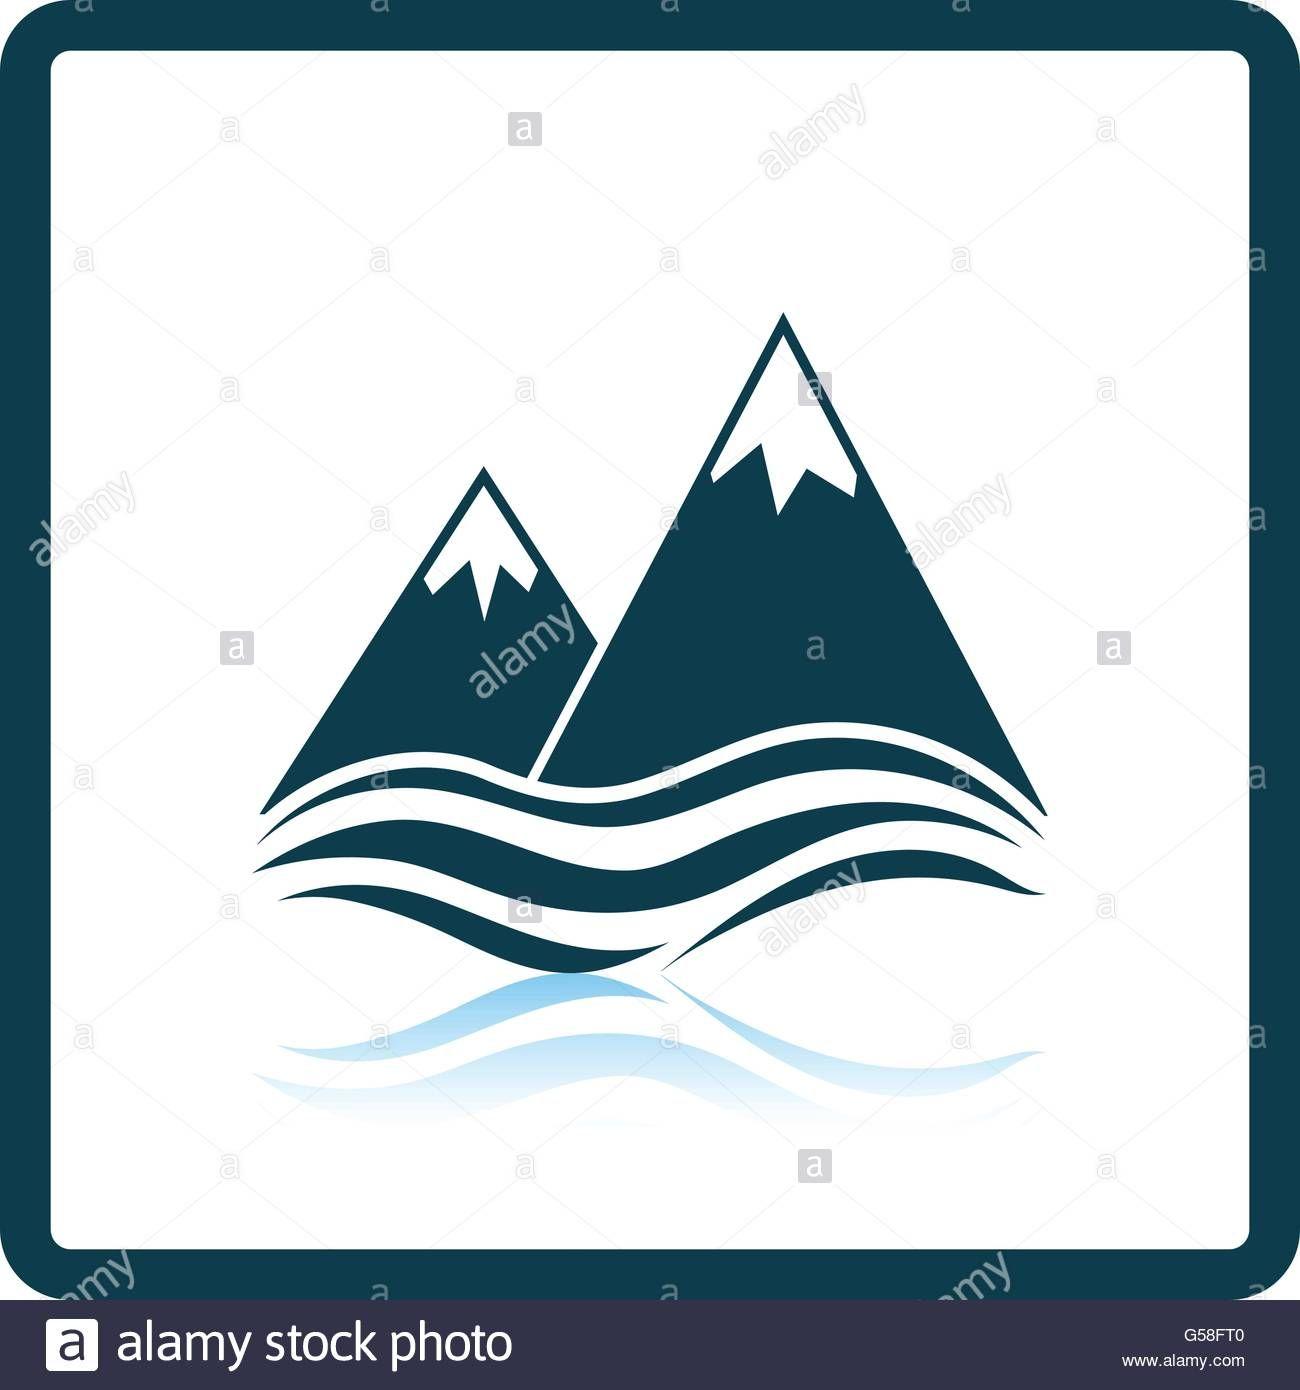 Mountain Reflection Logo - Image result for mountain reflection logo | Mountain Shadow ...